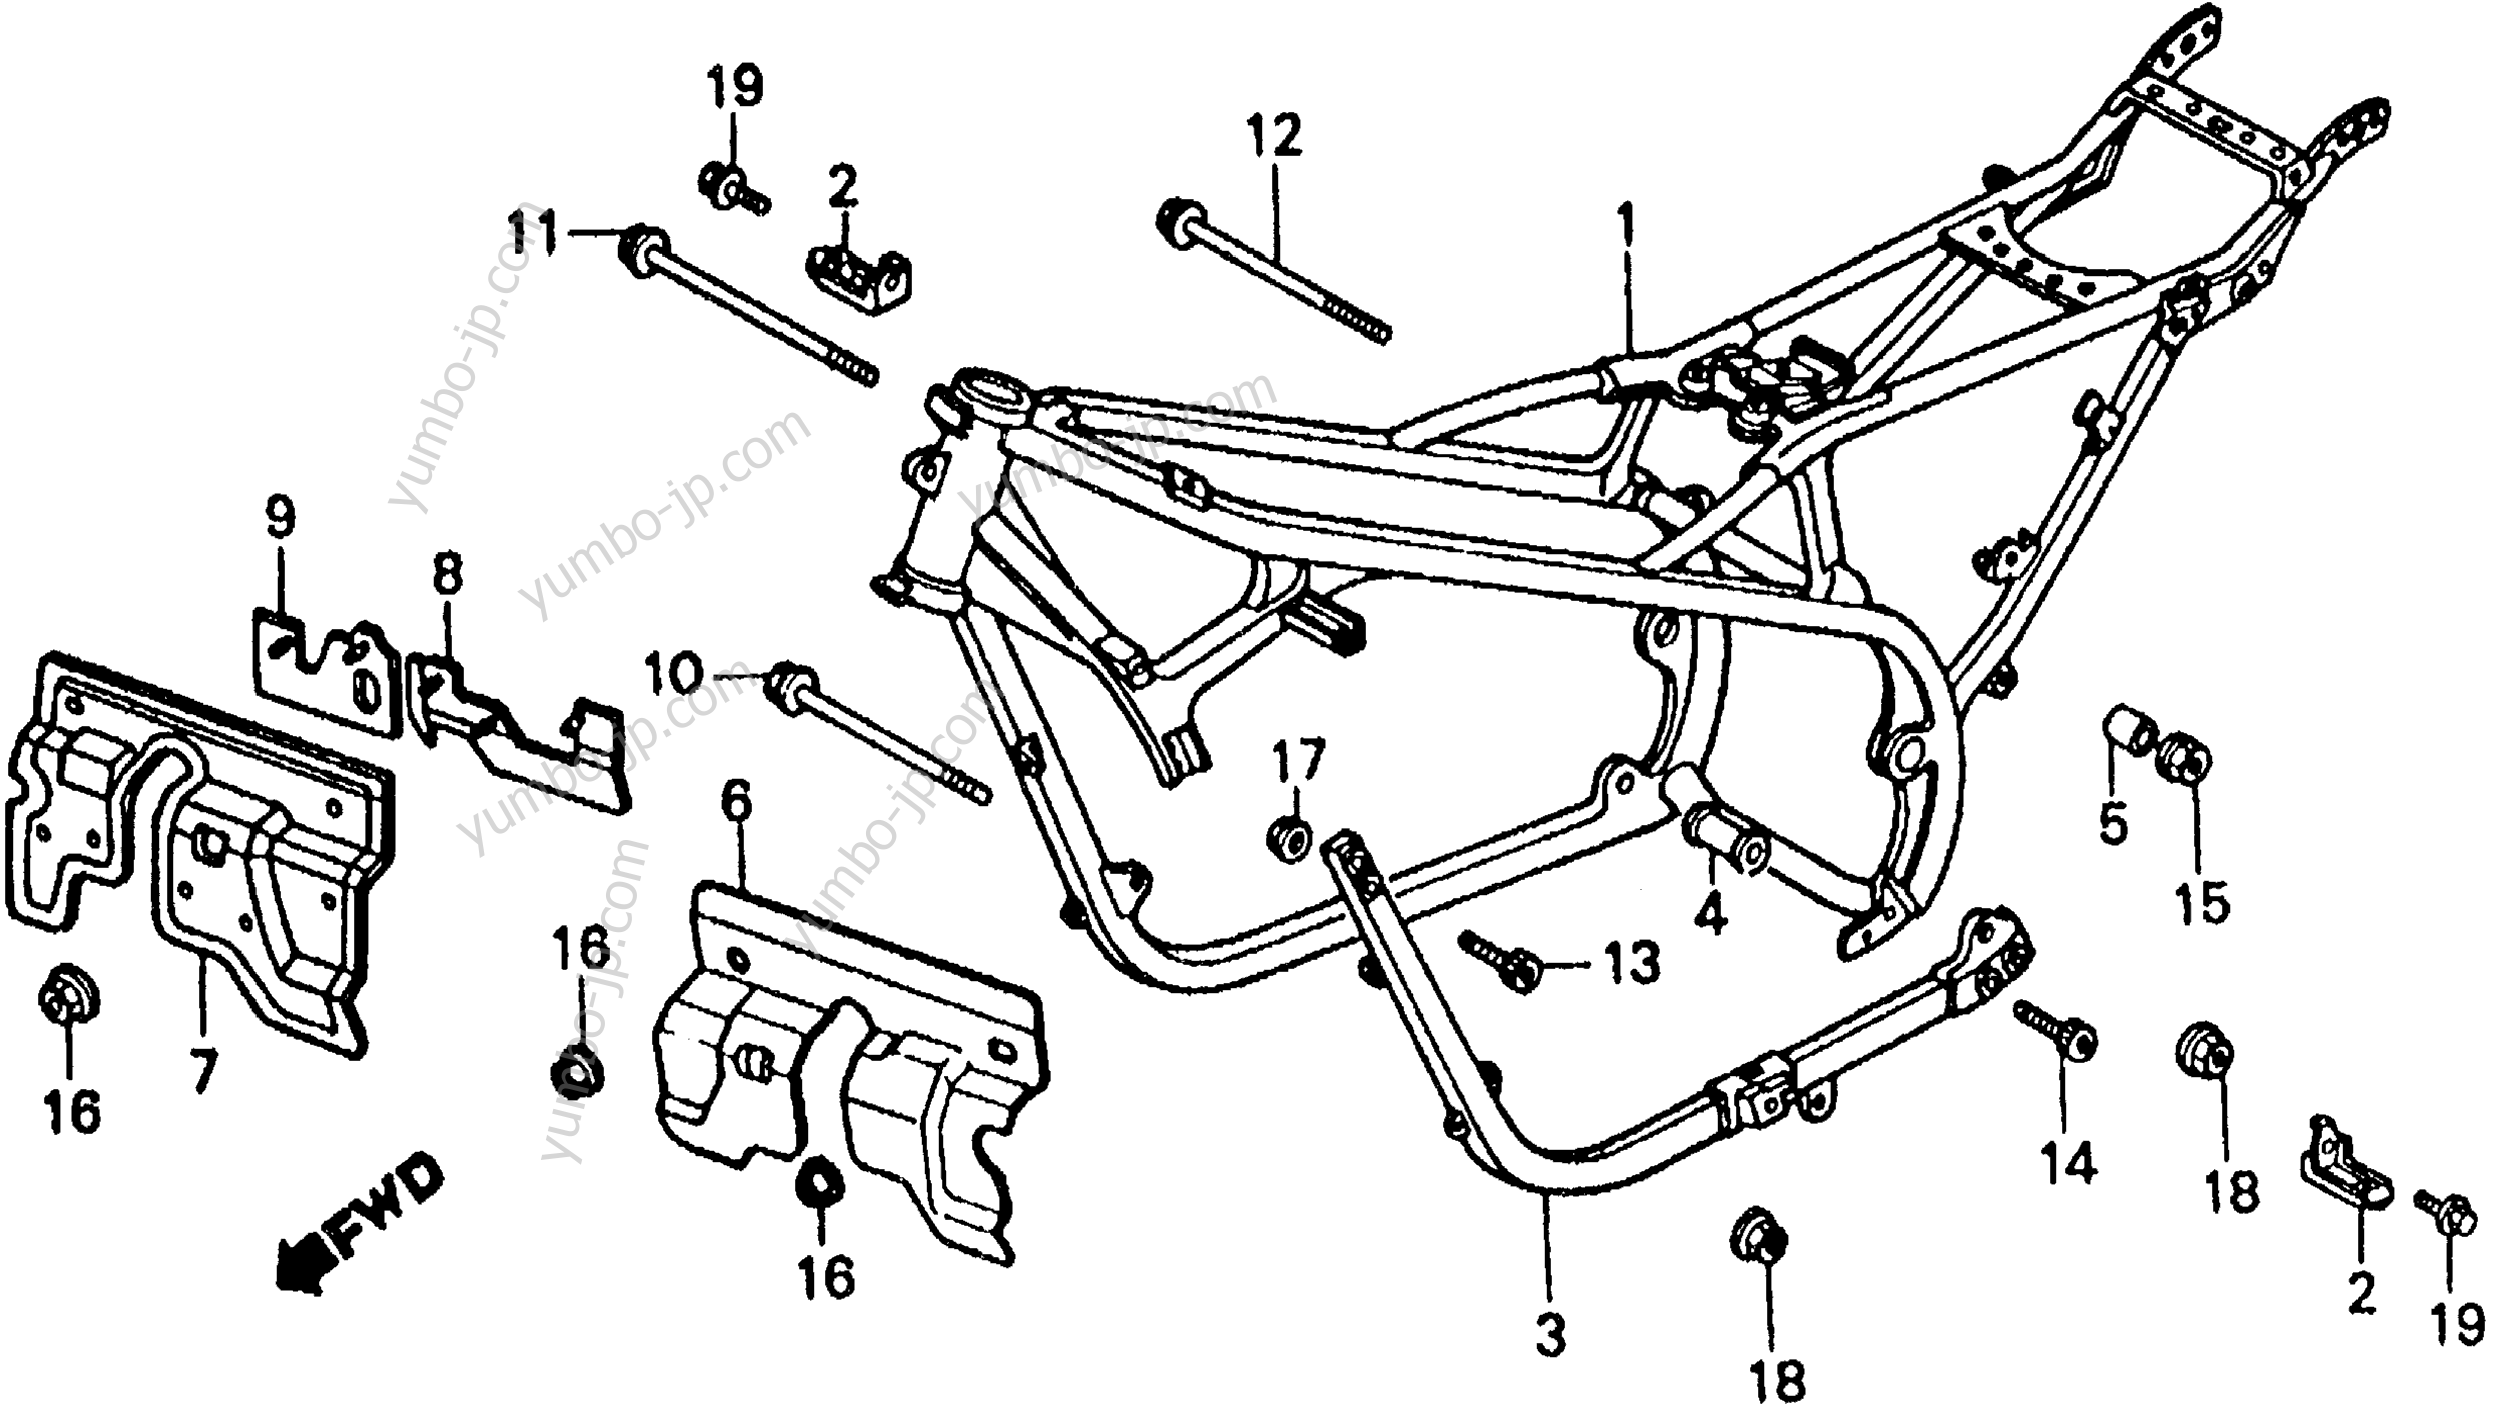 FRAME for motorcycles HONDA VF500F A 1986 year